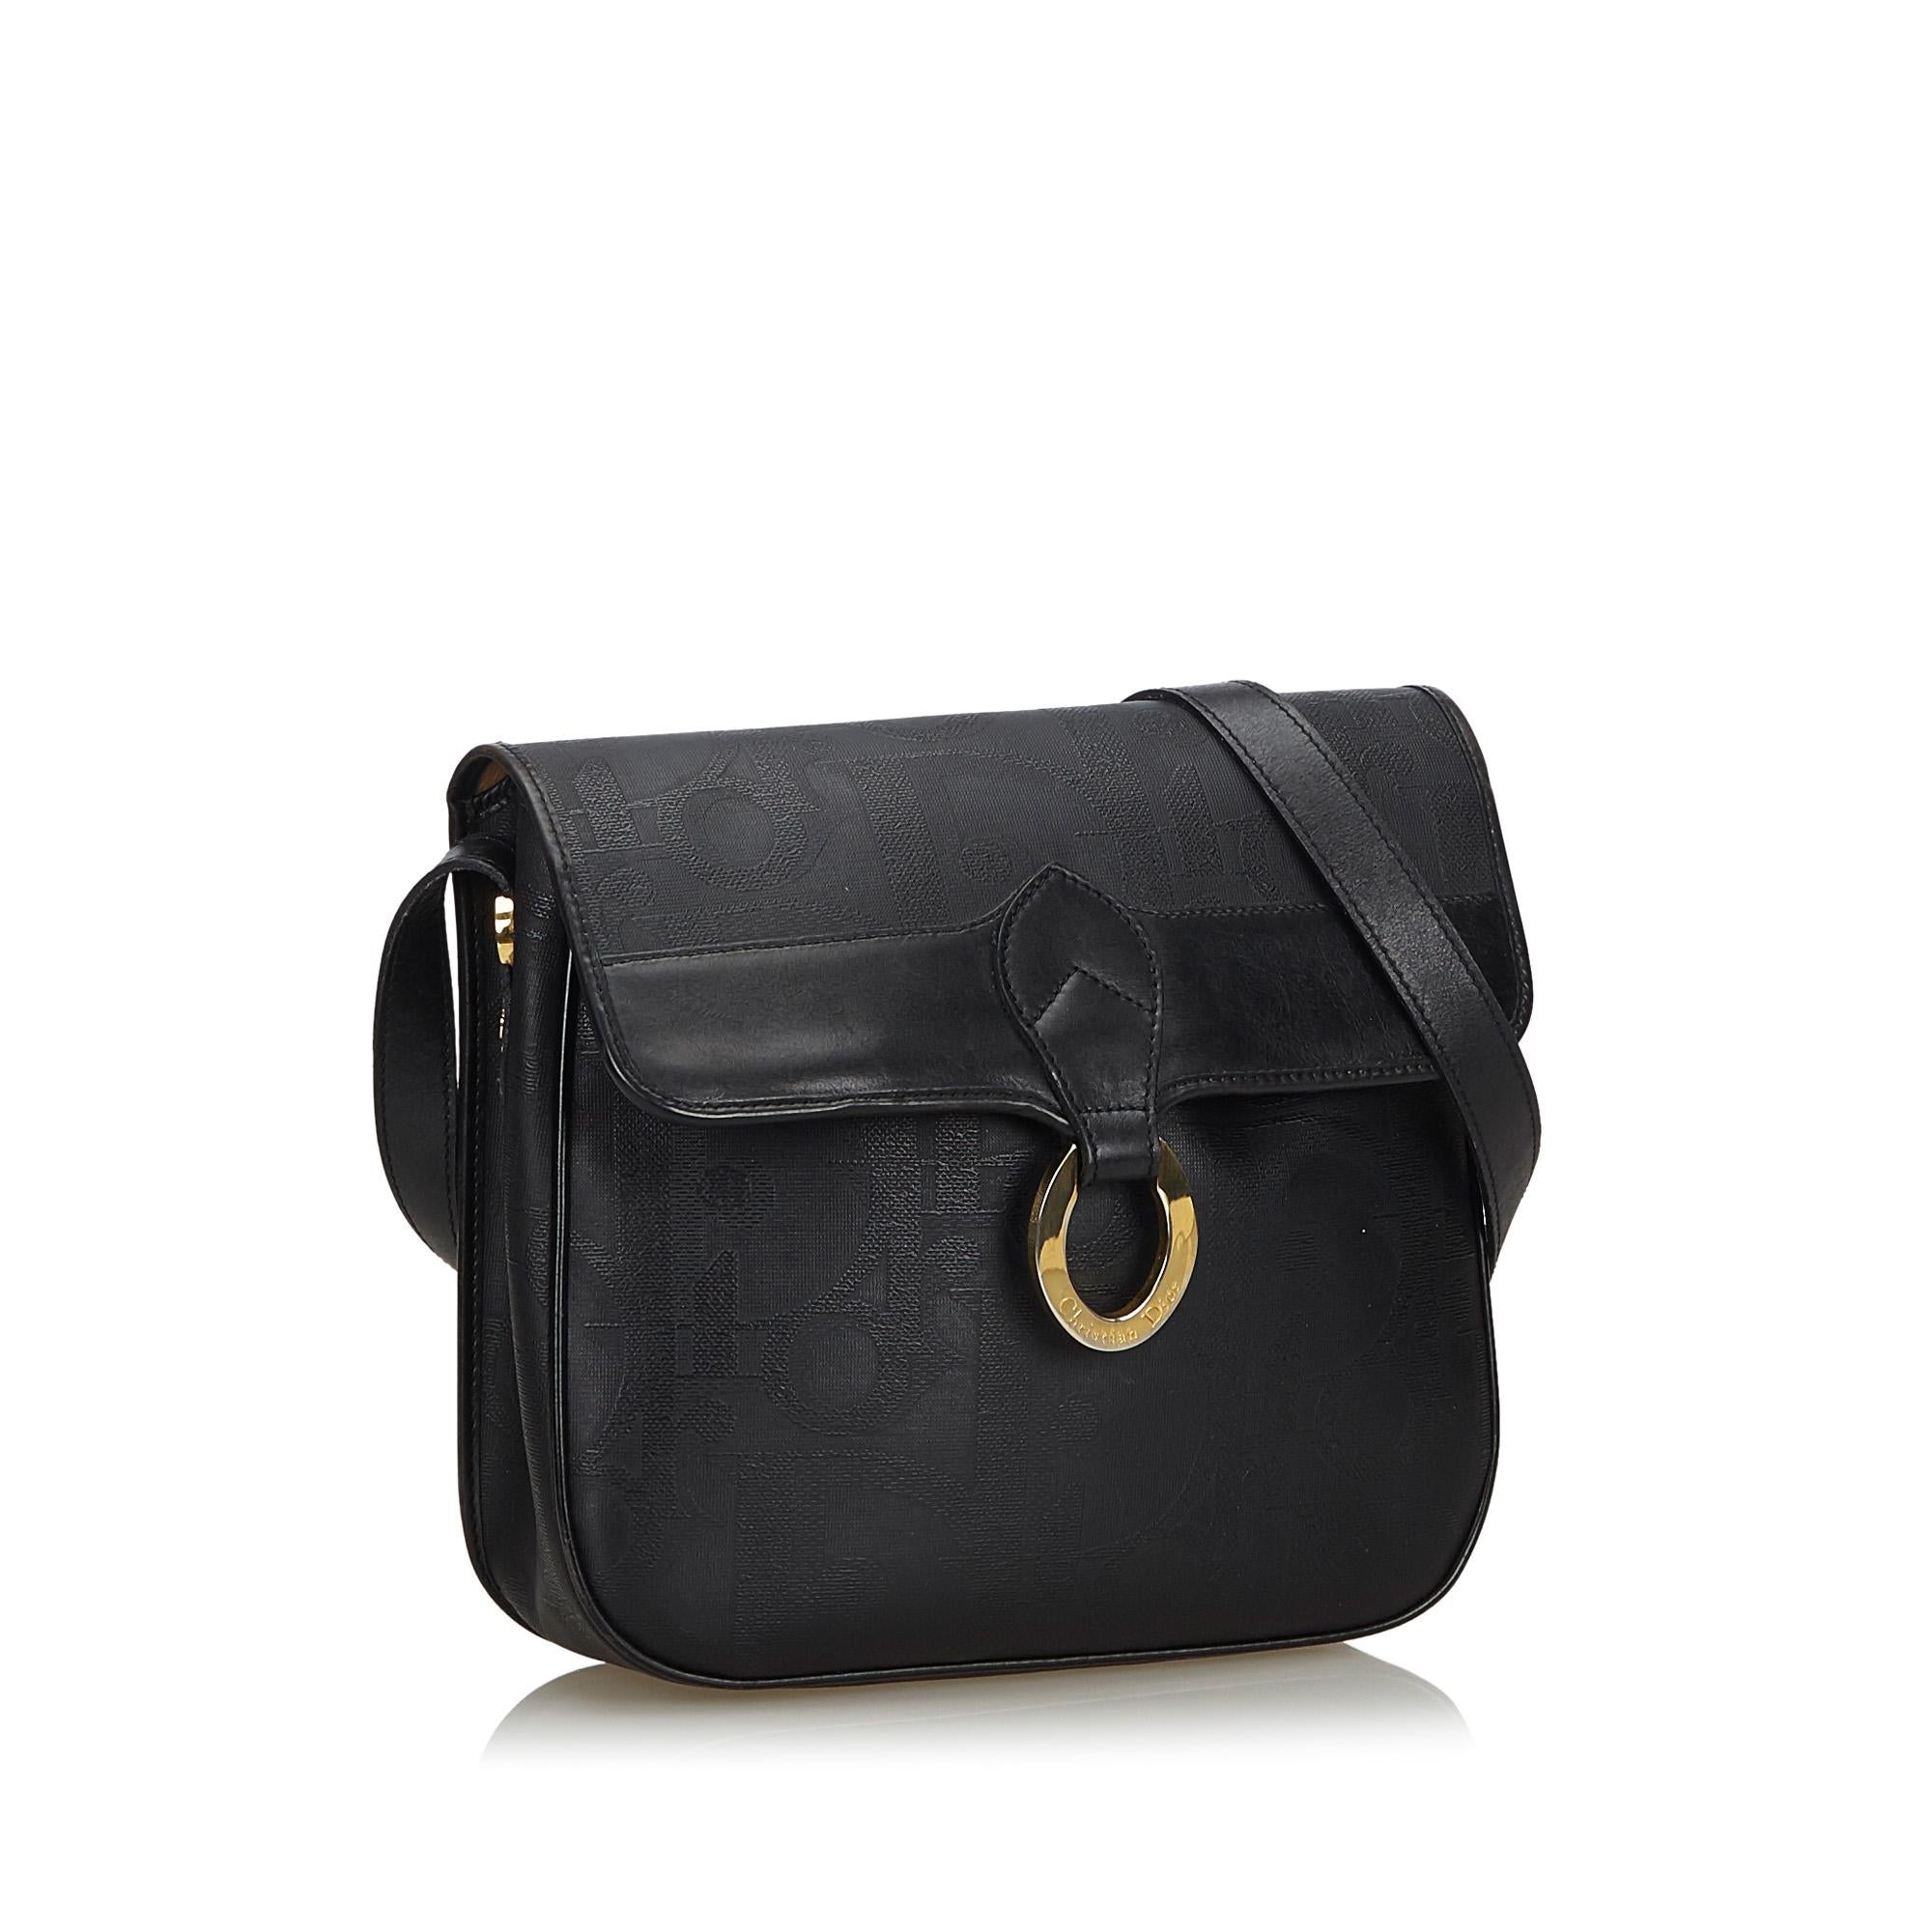 This crossbody bag features a PVC body with leather trim, a flat leather strap, a front flap with a magnetic closure, and an interior zip pocket. It carries as B+ condition rating.

Inclusions: 
This item does not come with